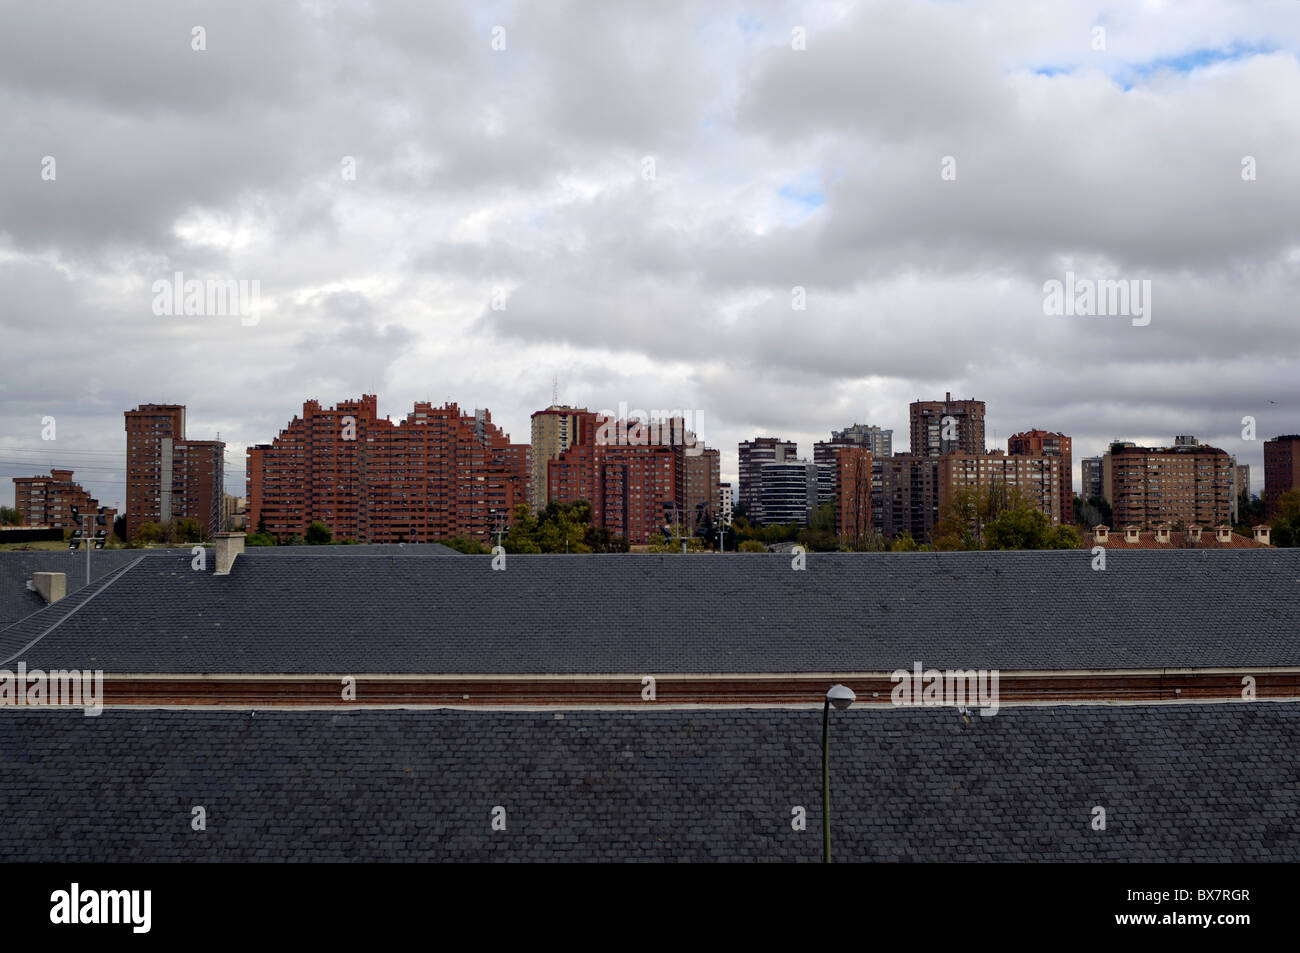 Chamartin district in Madrid Stock Photo